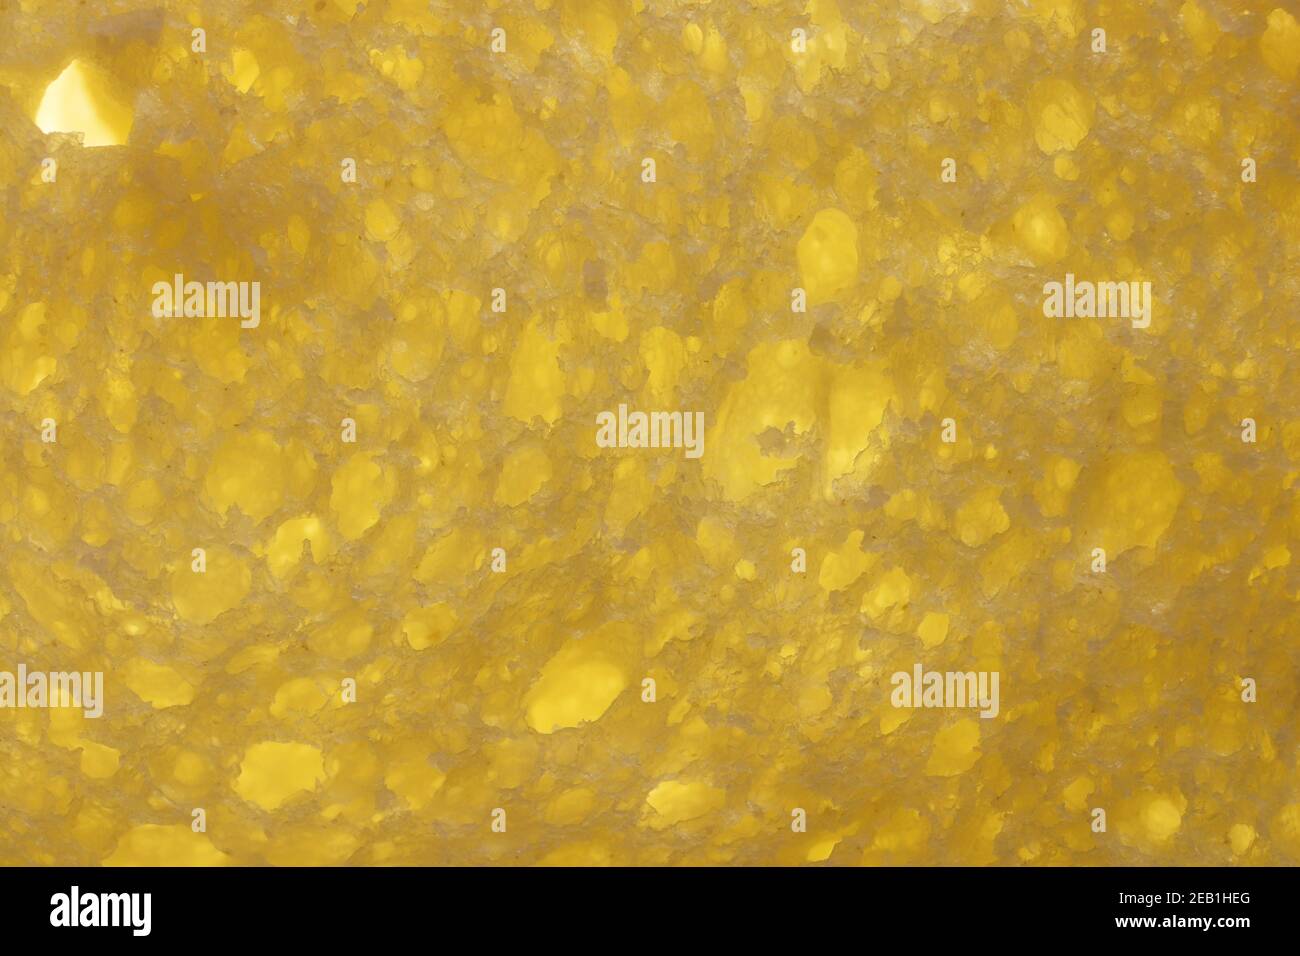 Bread crumb texture. Bakery slice filling background. Stock Photo